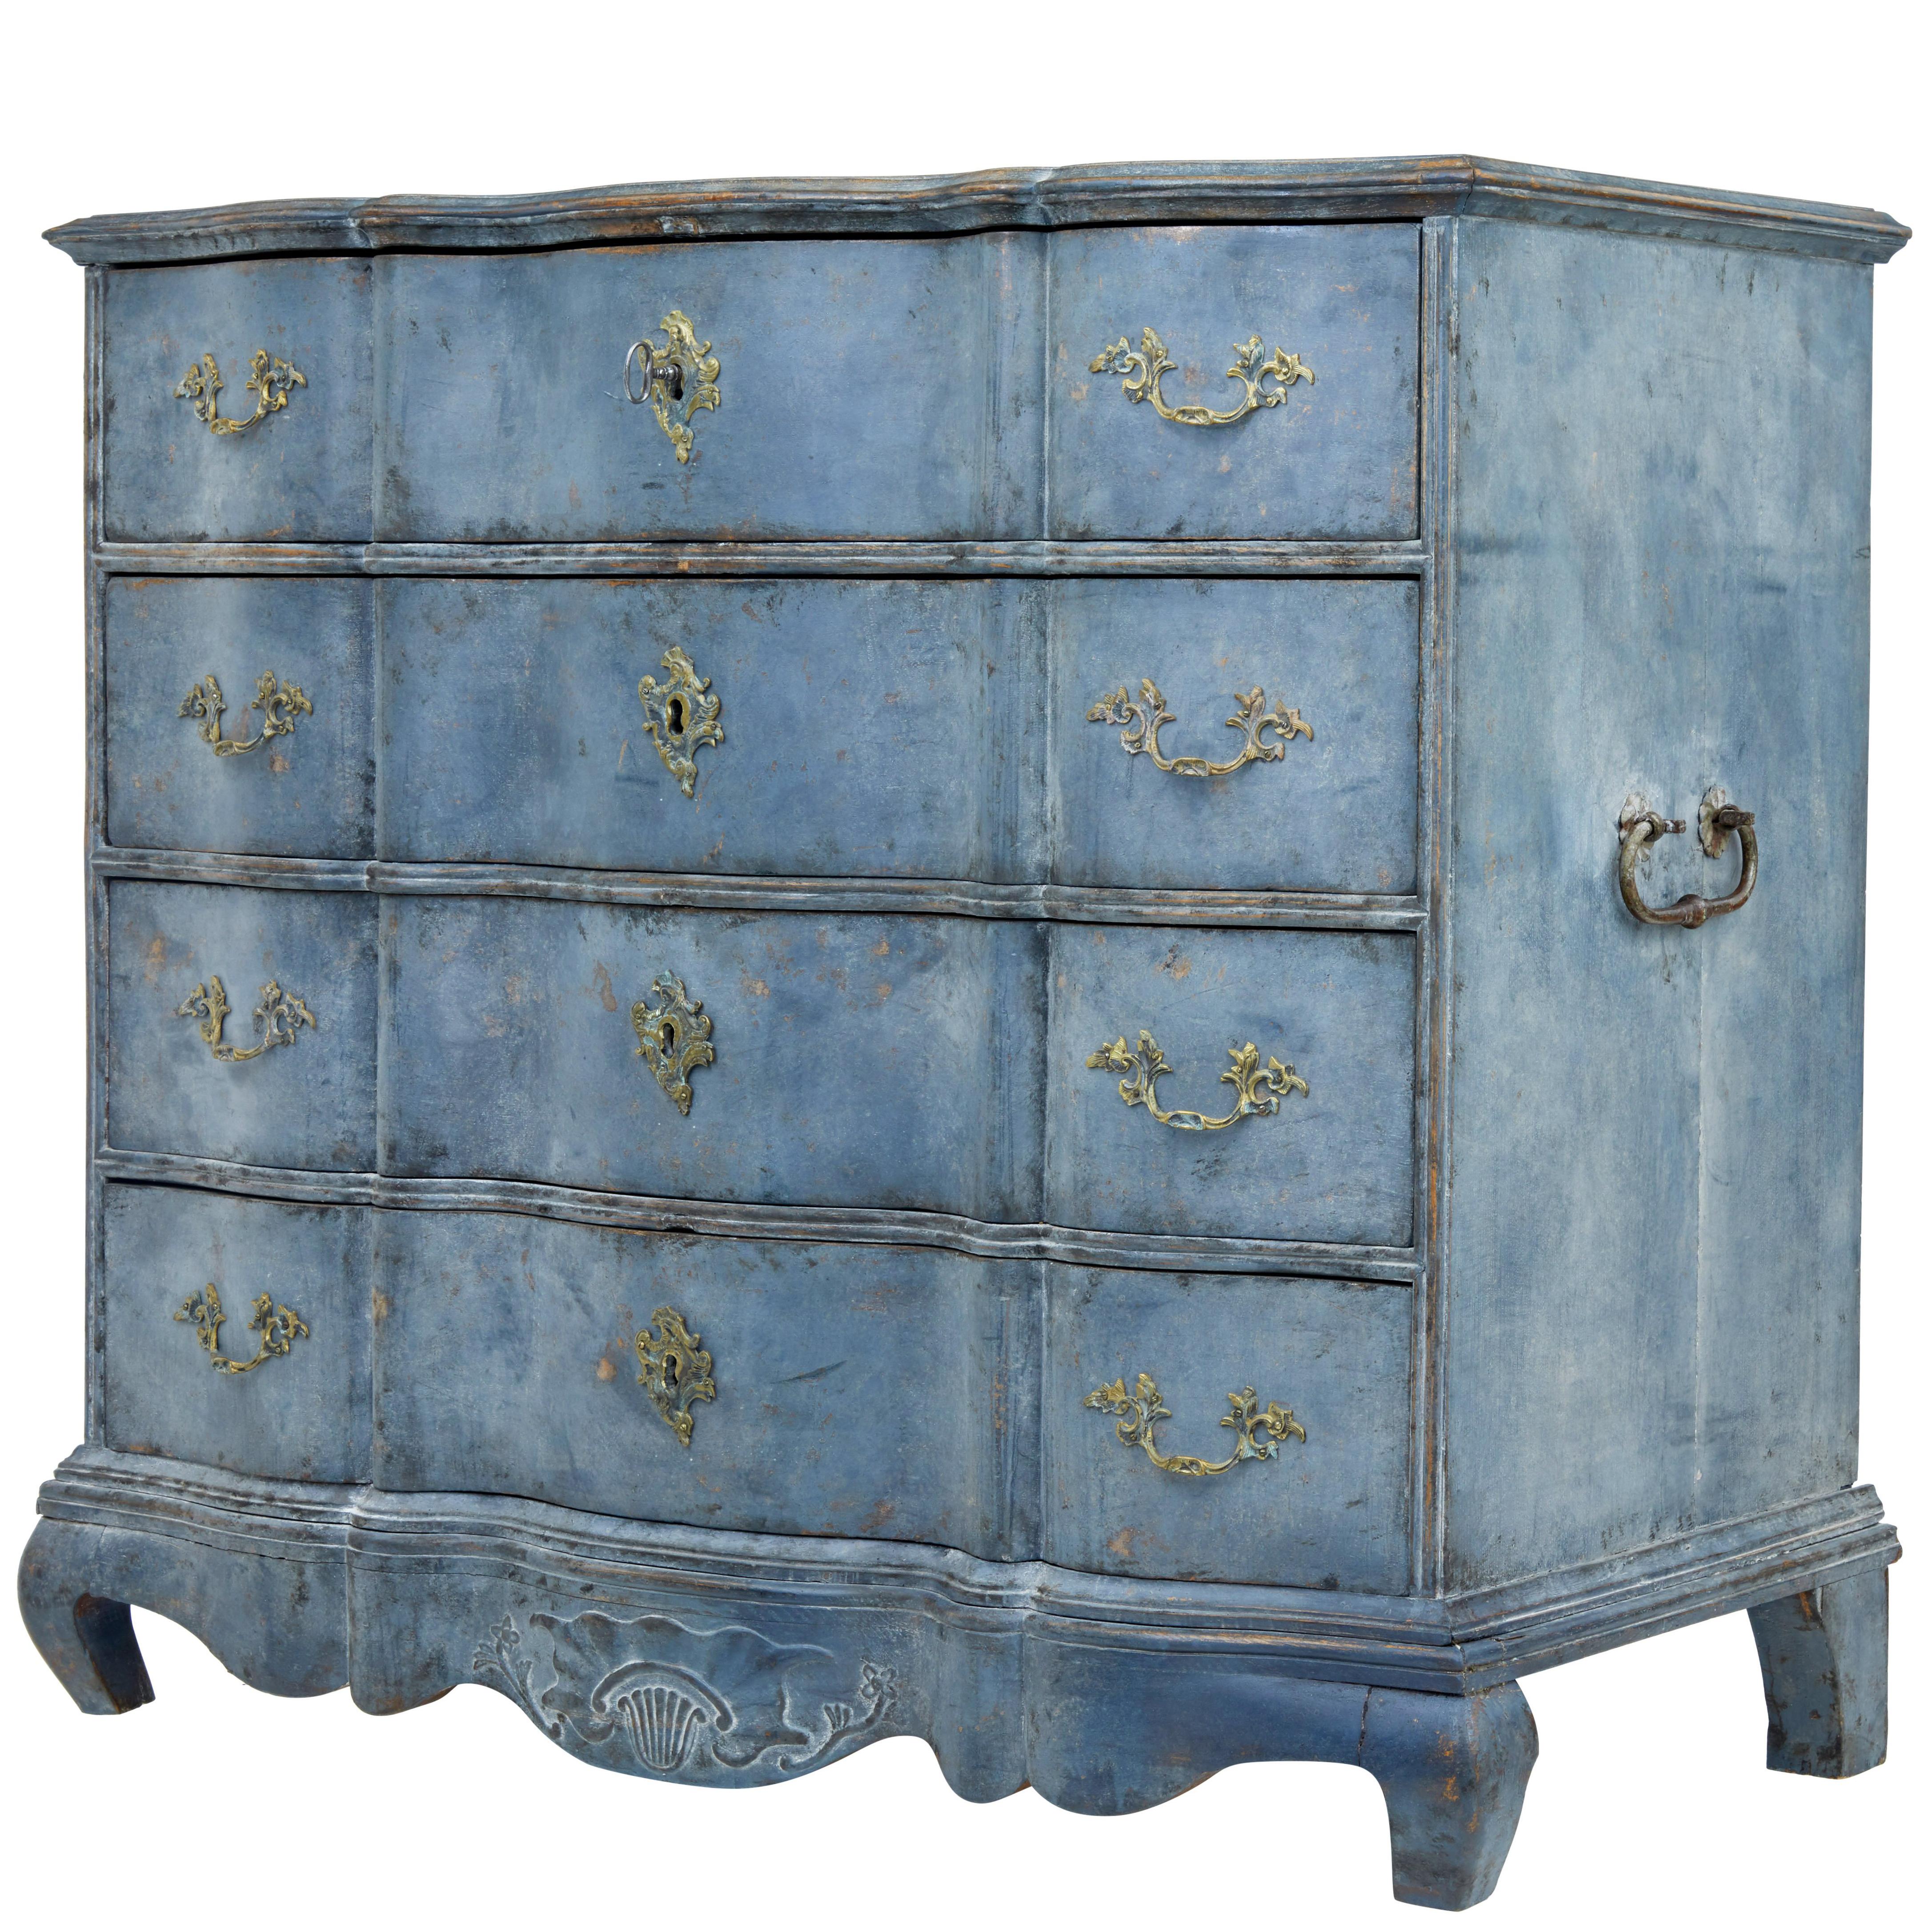 19th Century Swedish Shaped Front Painted Commode of Large Proportions